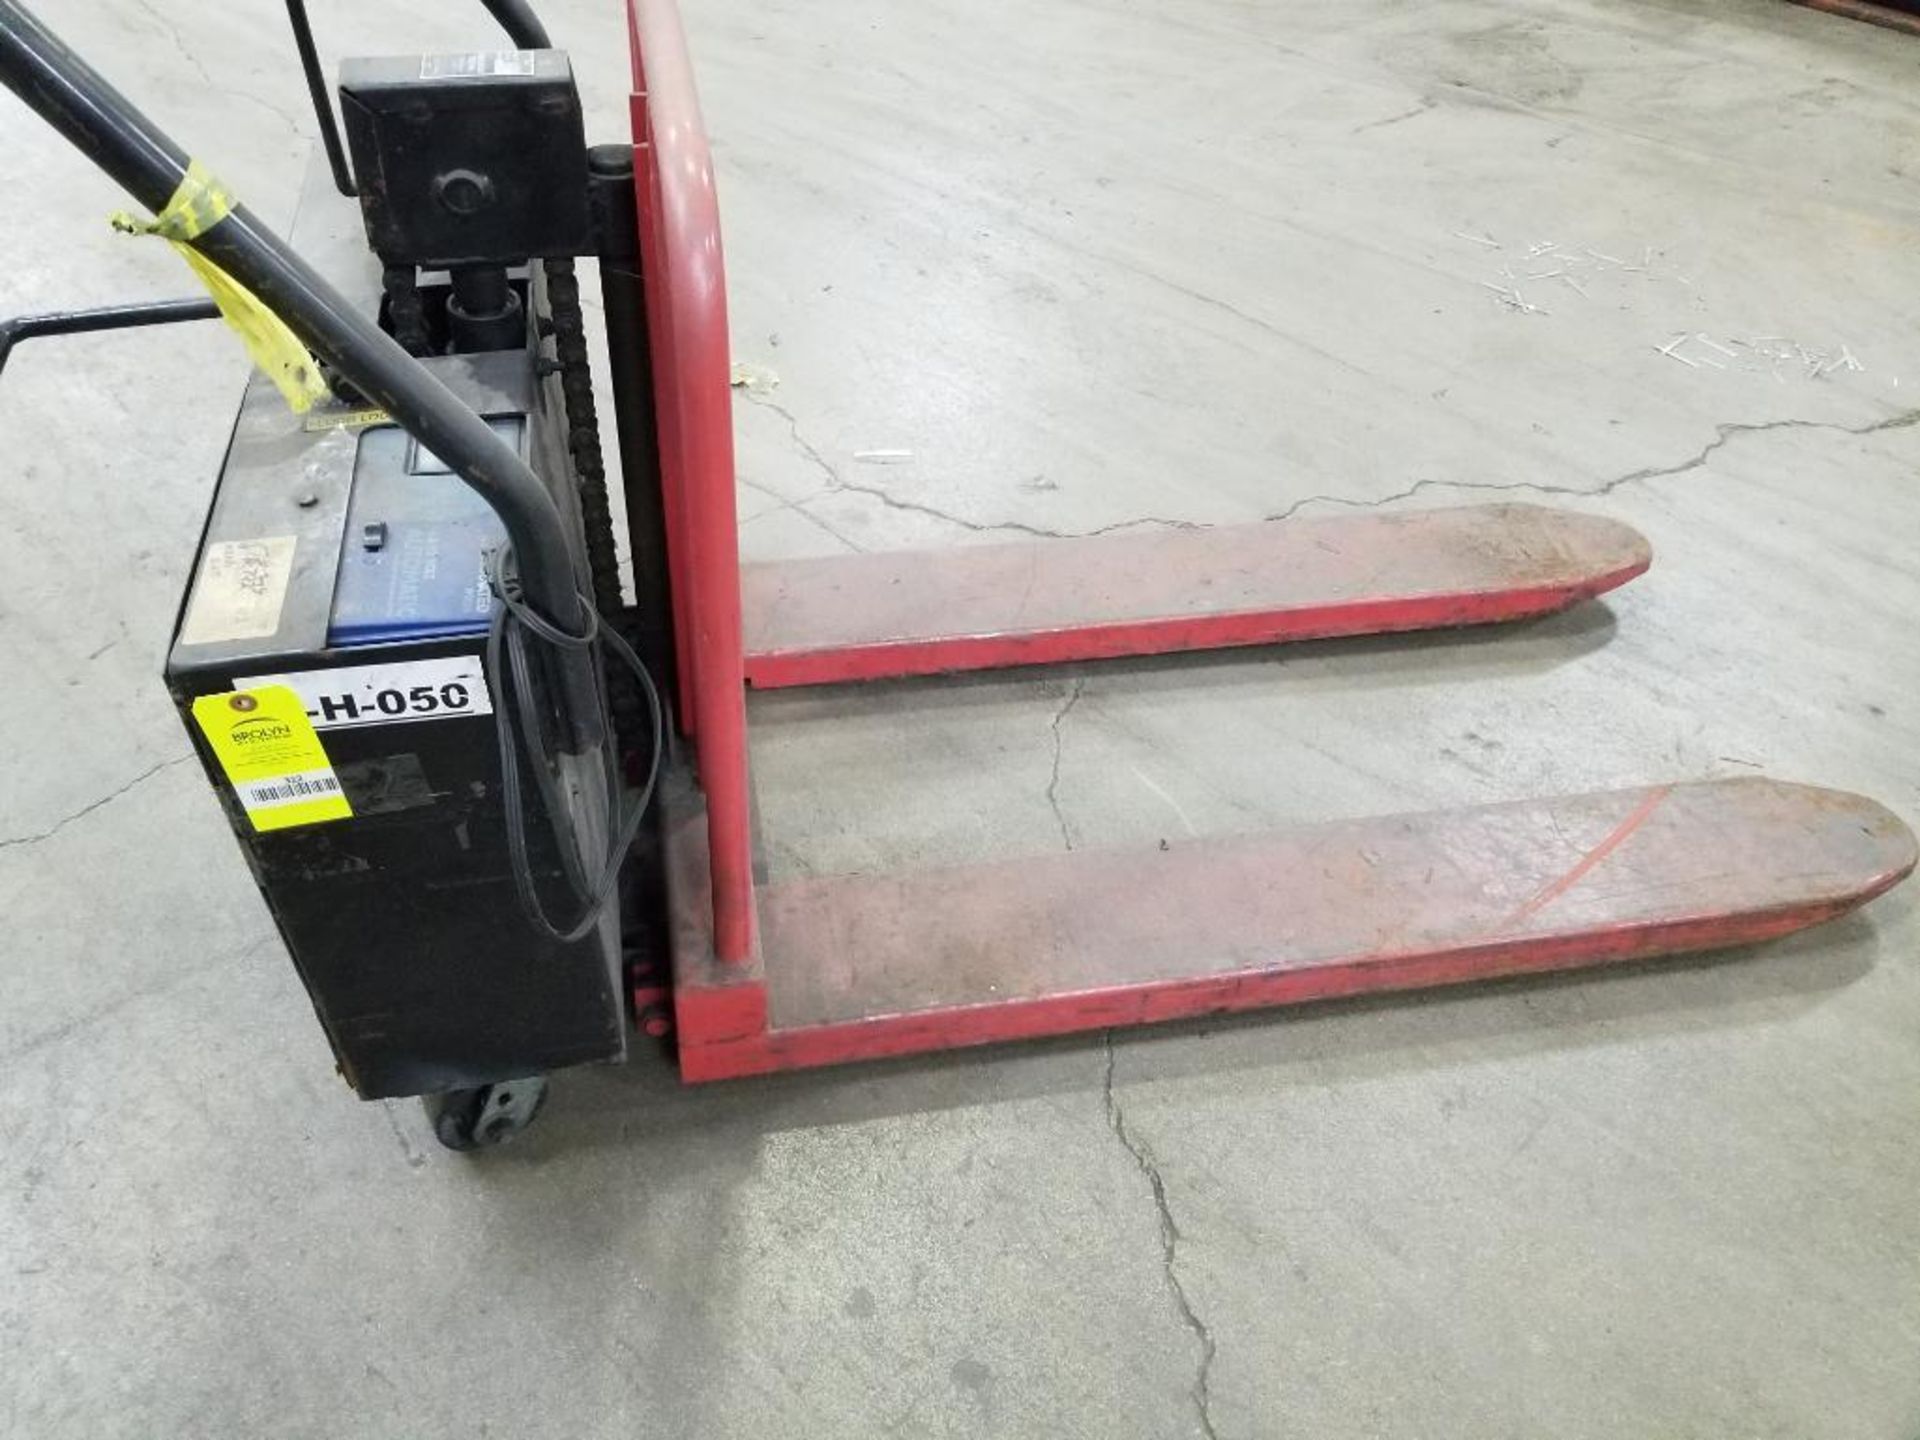 2500lb capacity battery operated power pallet jack. Built in charger.